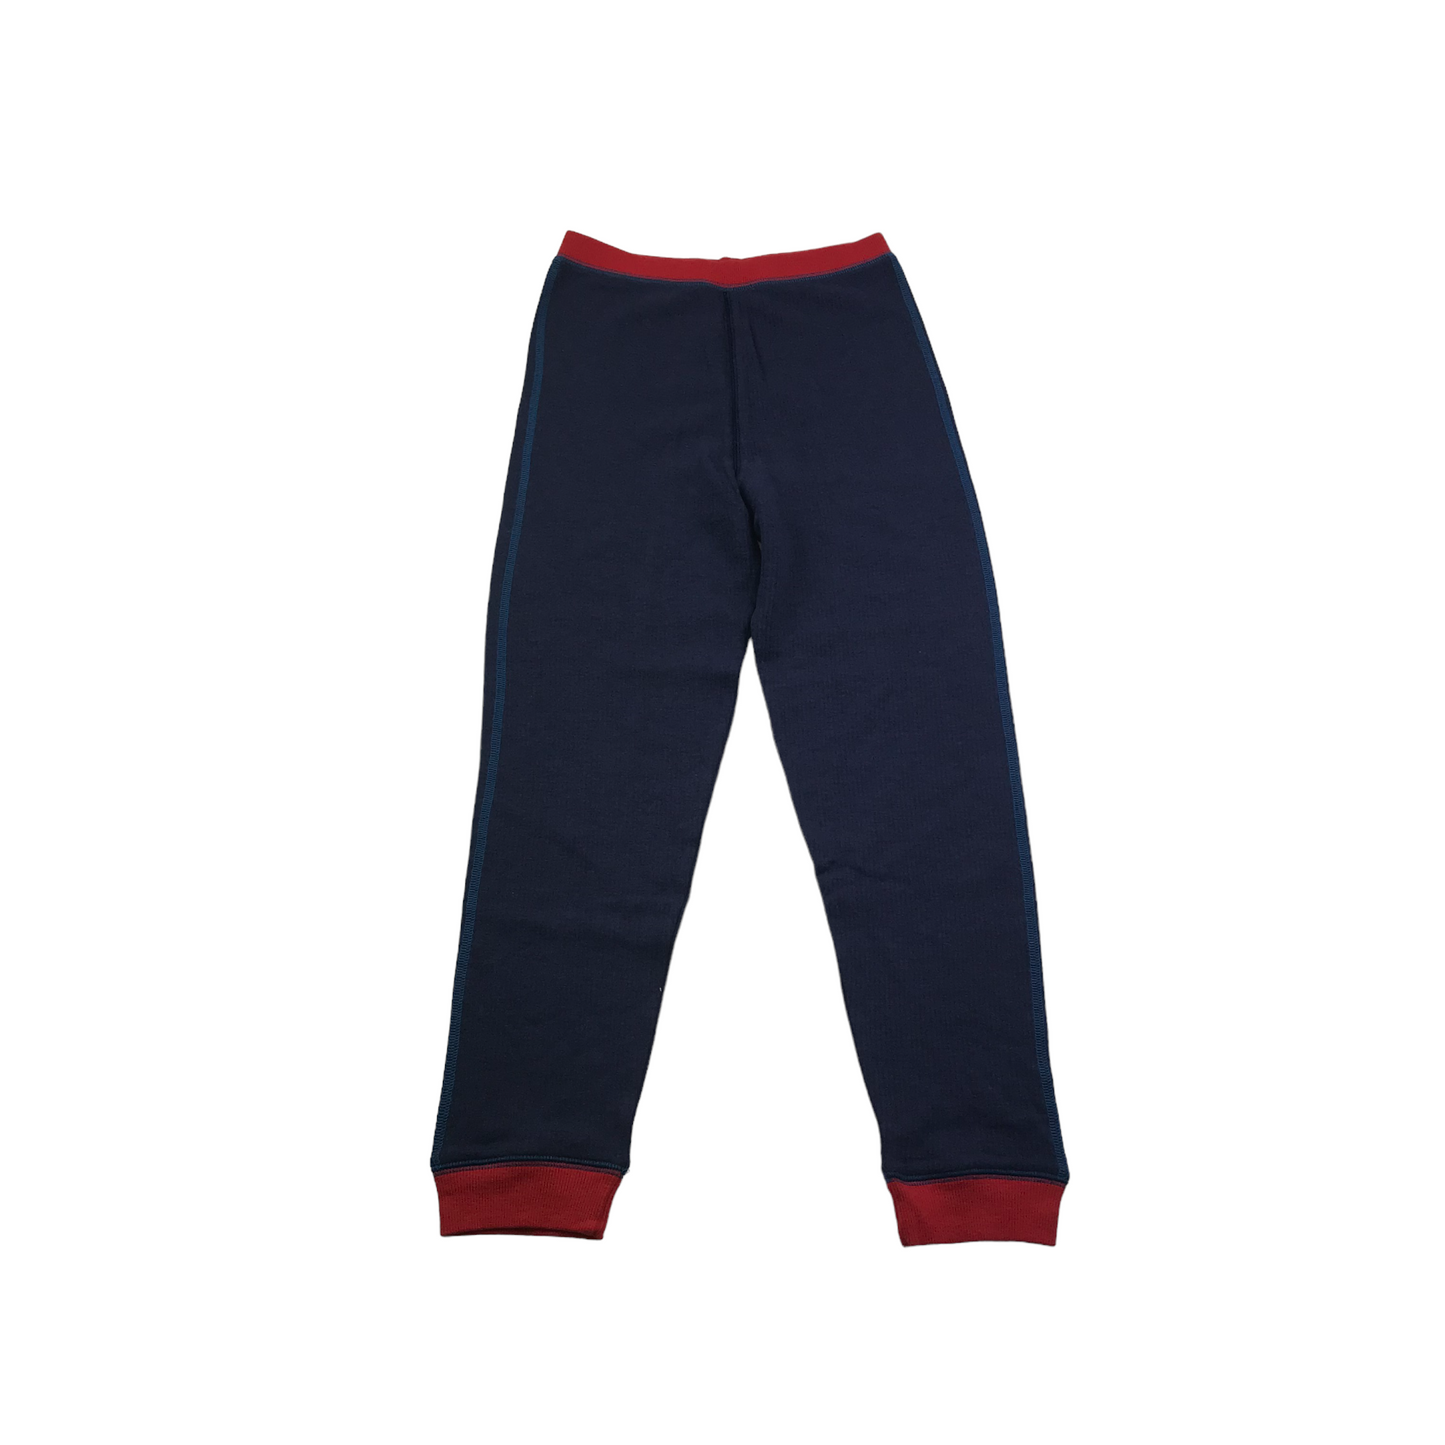 M&S Navy and Red Thermal Layer Leggings Age 9